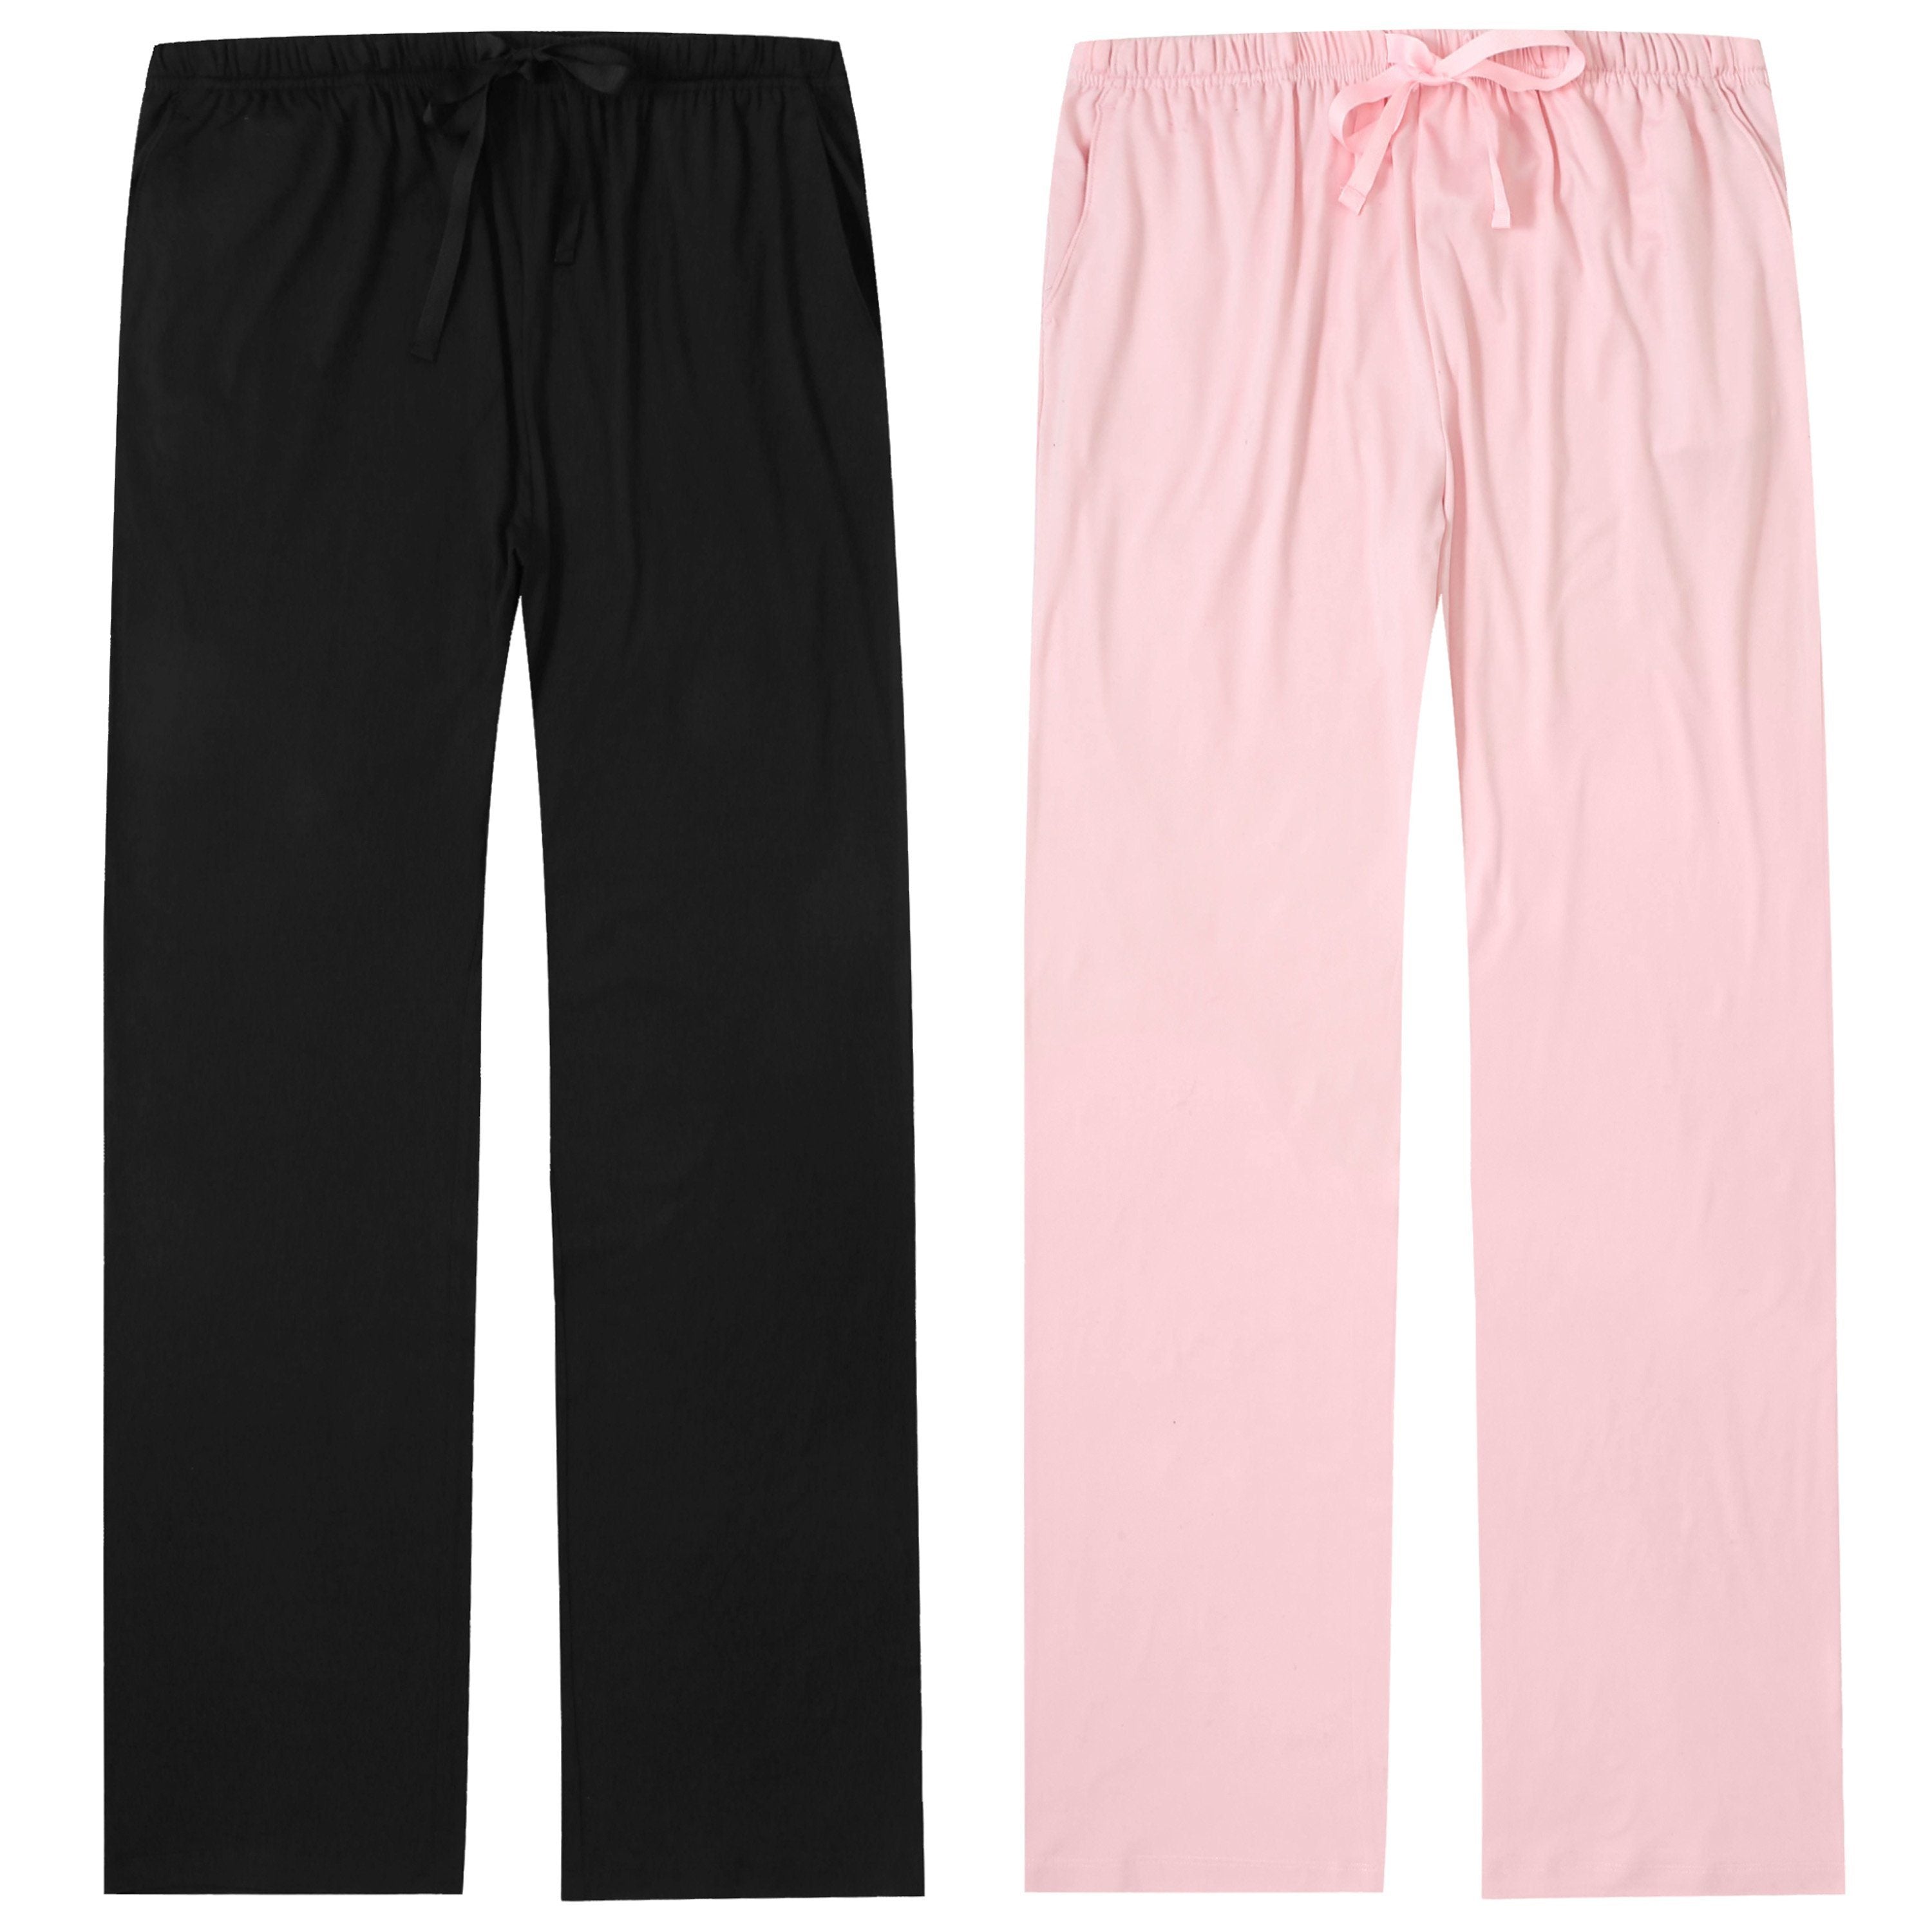 Pajama Pants for Women - 2Pack - Super Soft Knit & Stretchy Womens Pajama Pants